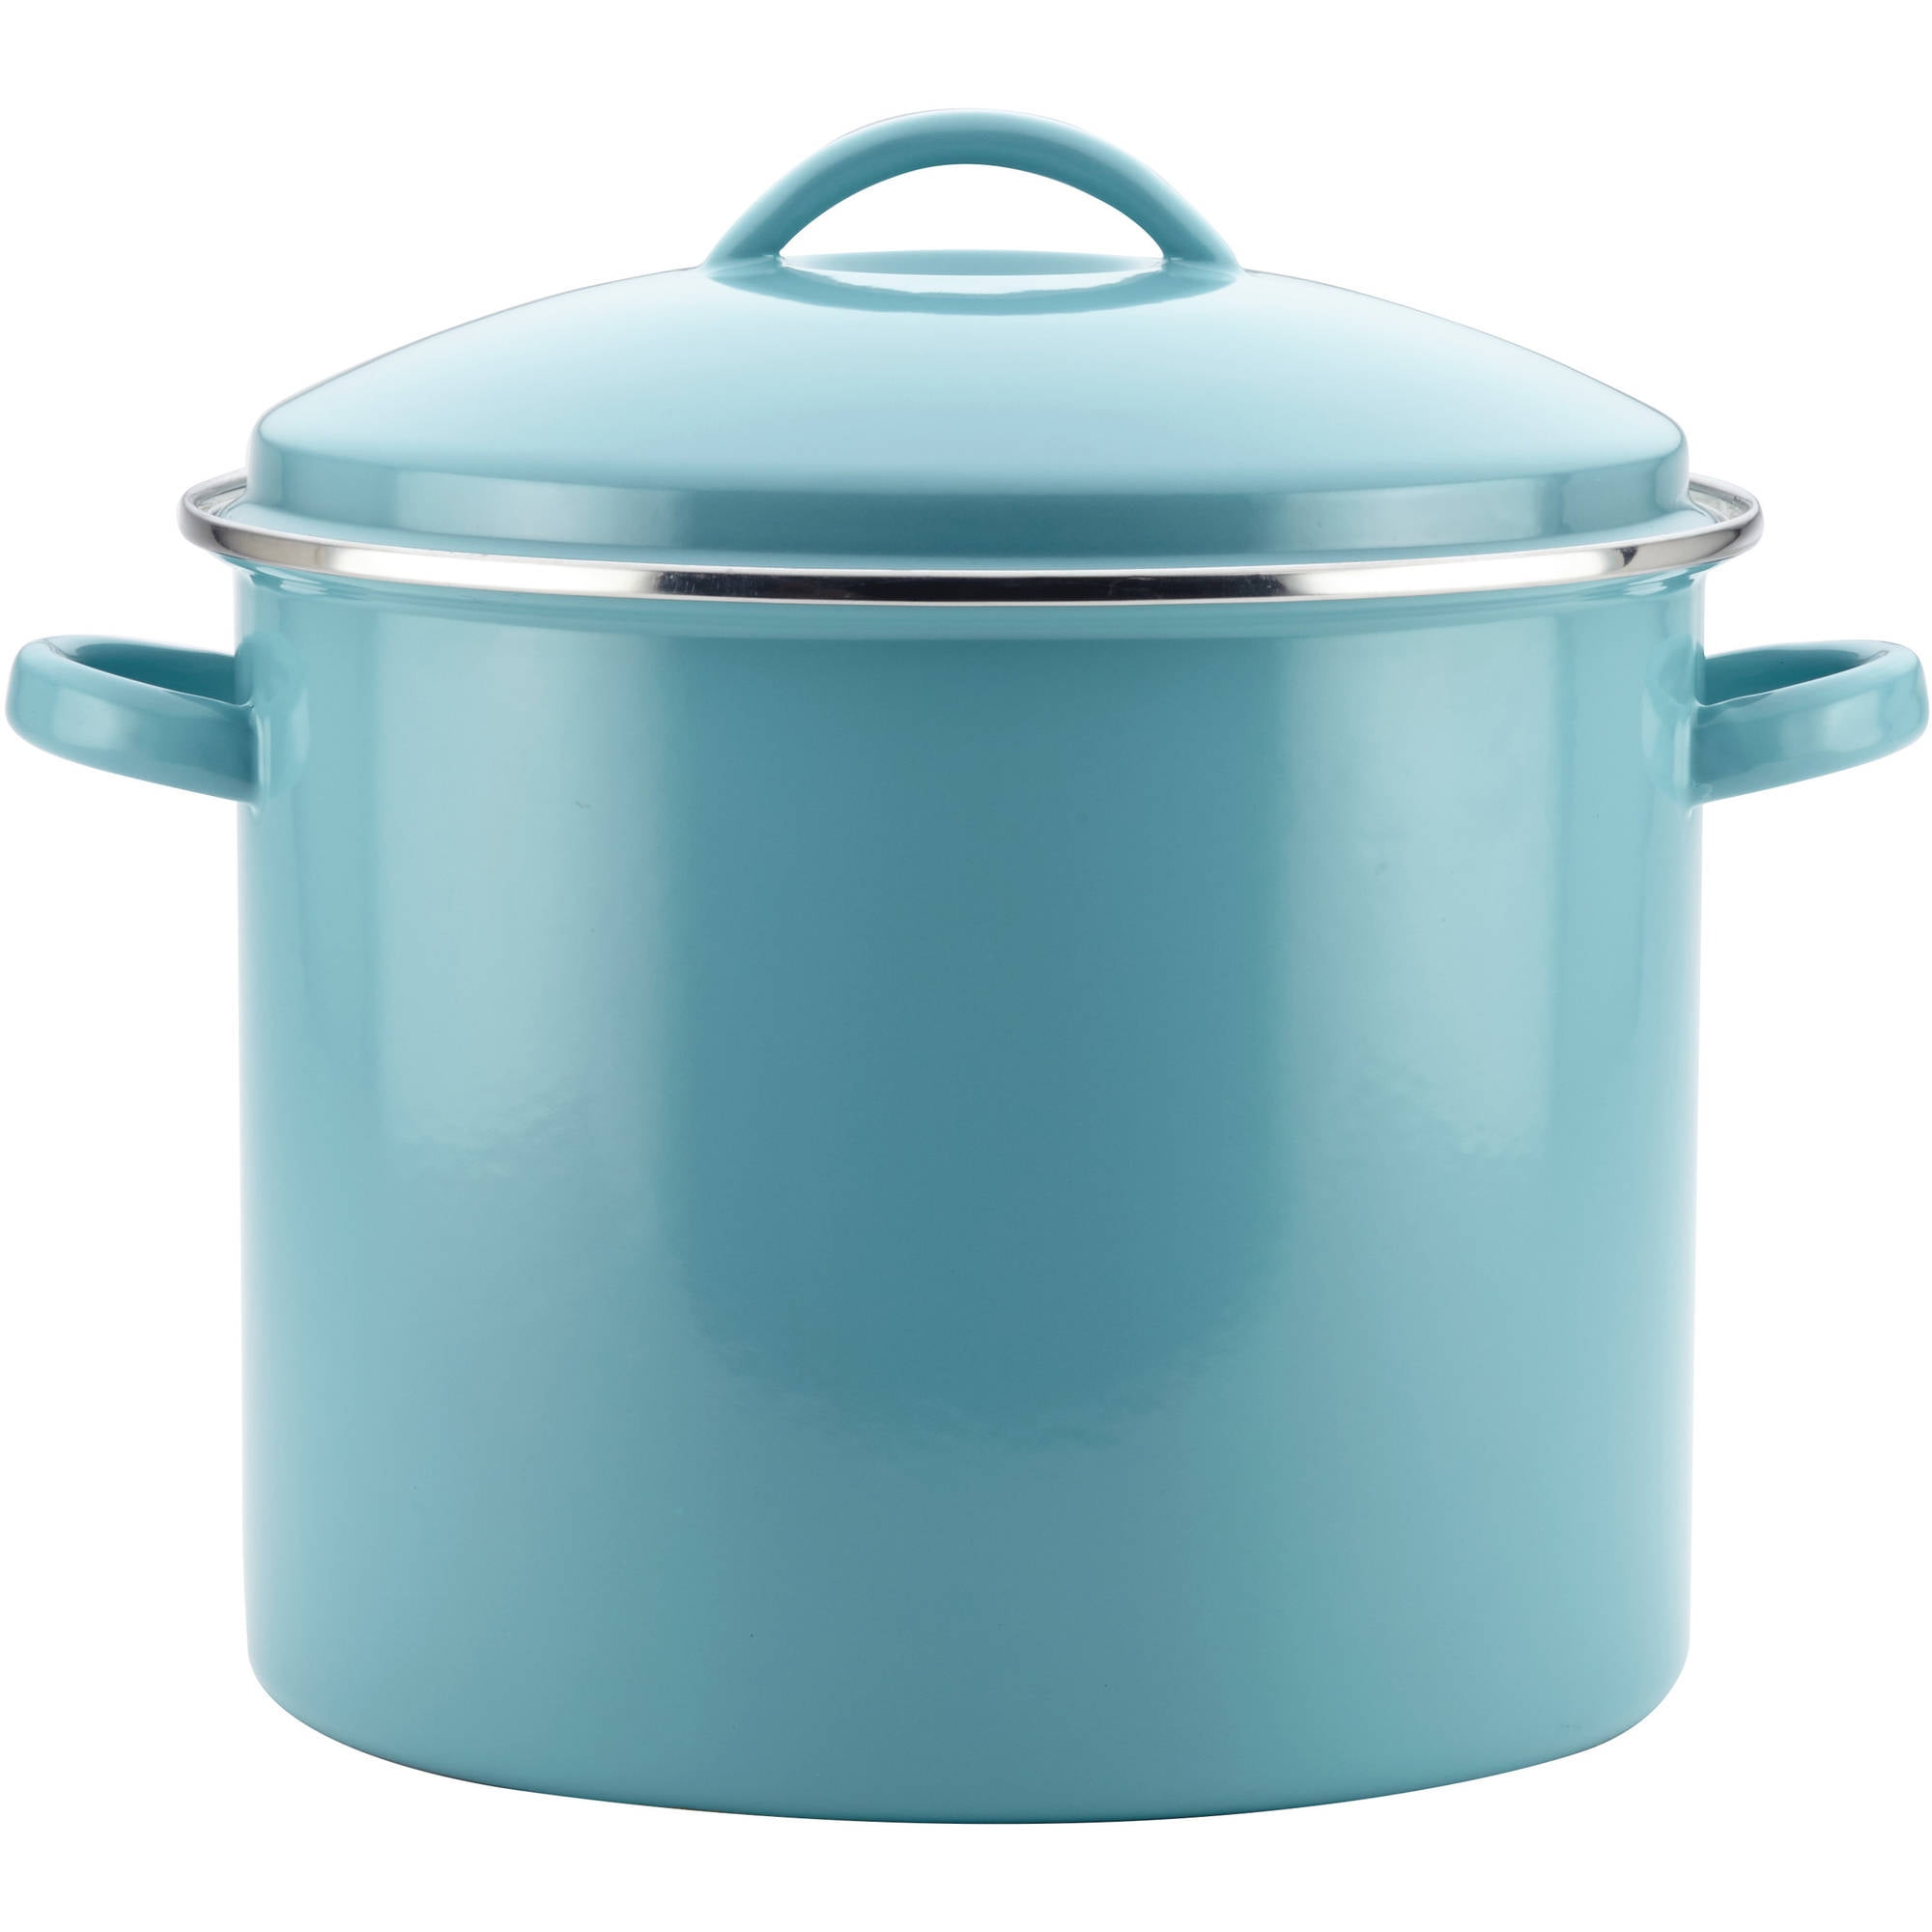 SILIT Enameled Blue 4 Quart Non-stick Stock Pot With Lid. Made in Germany.  